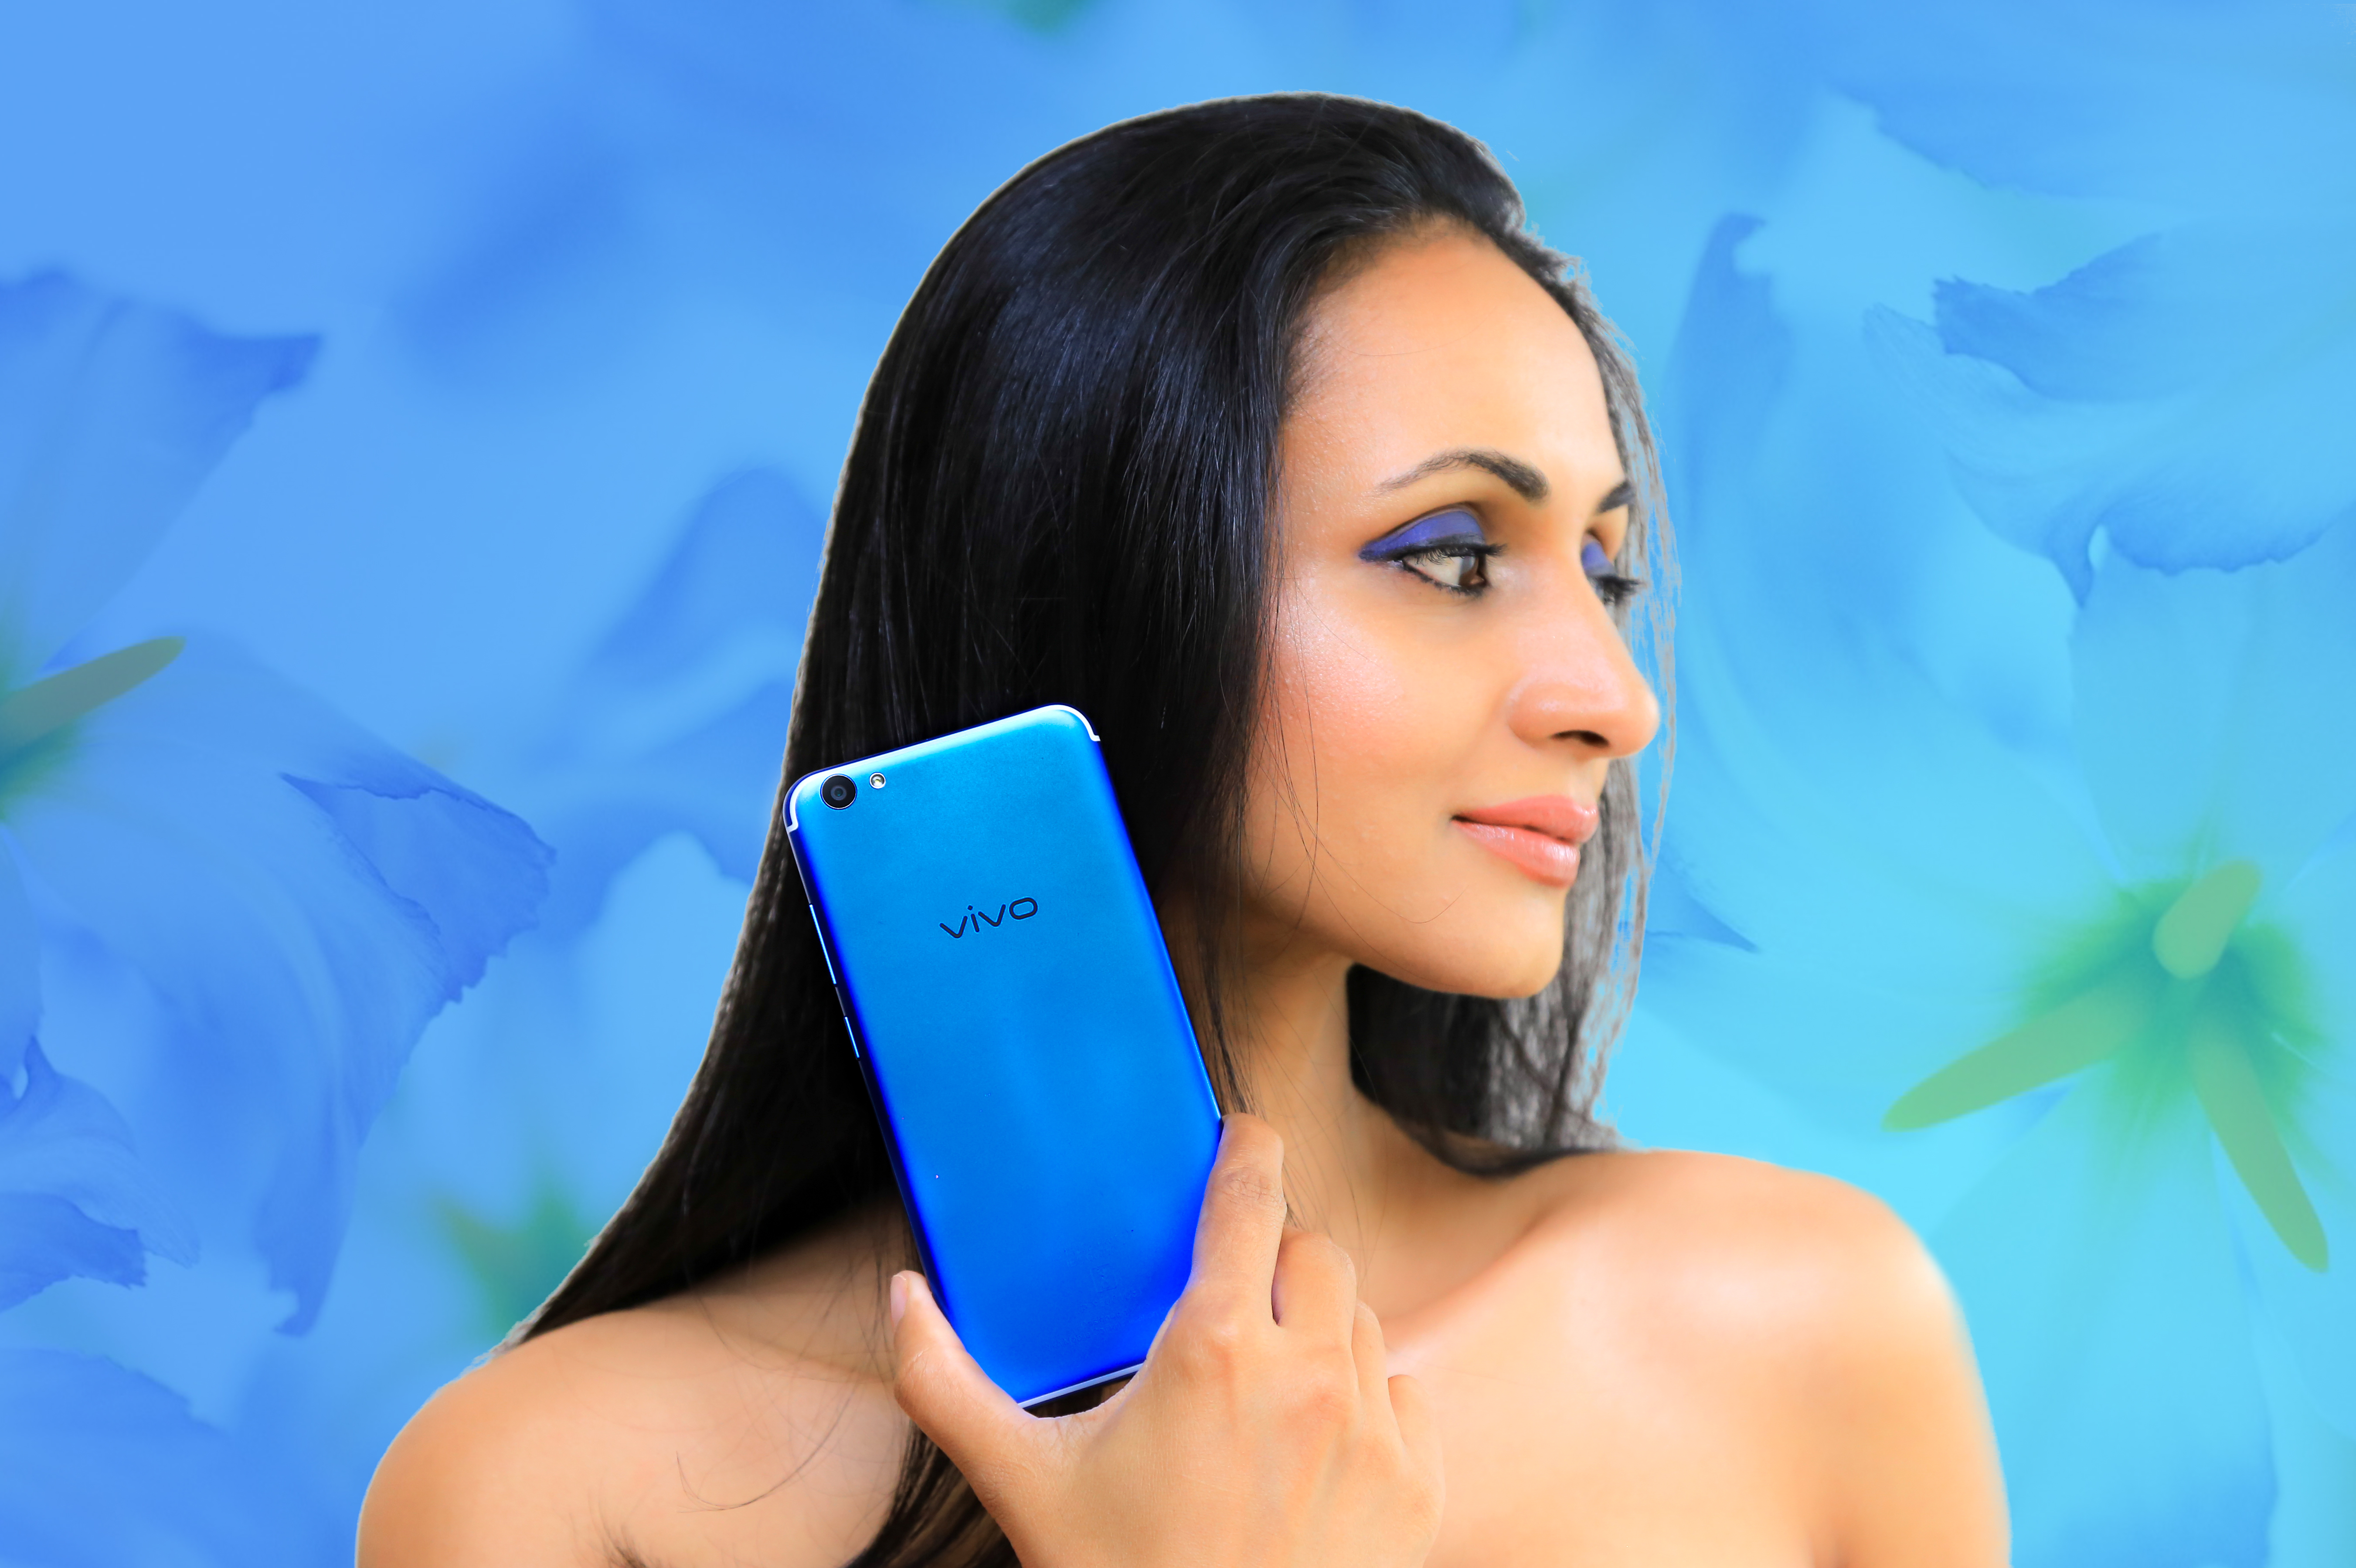 The all new VivoV5s in Energetic Blue